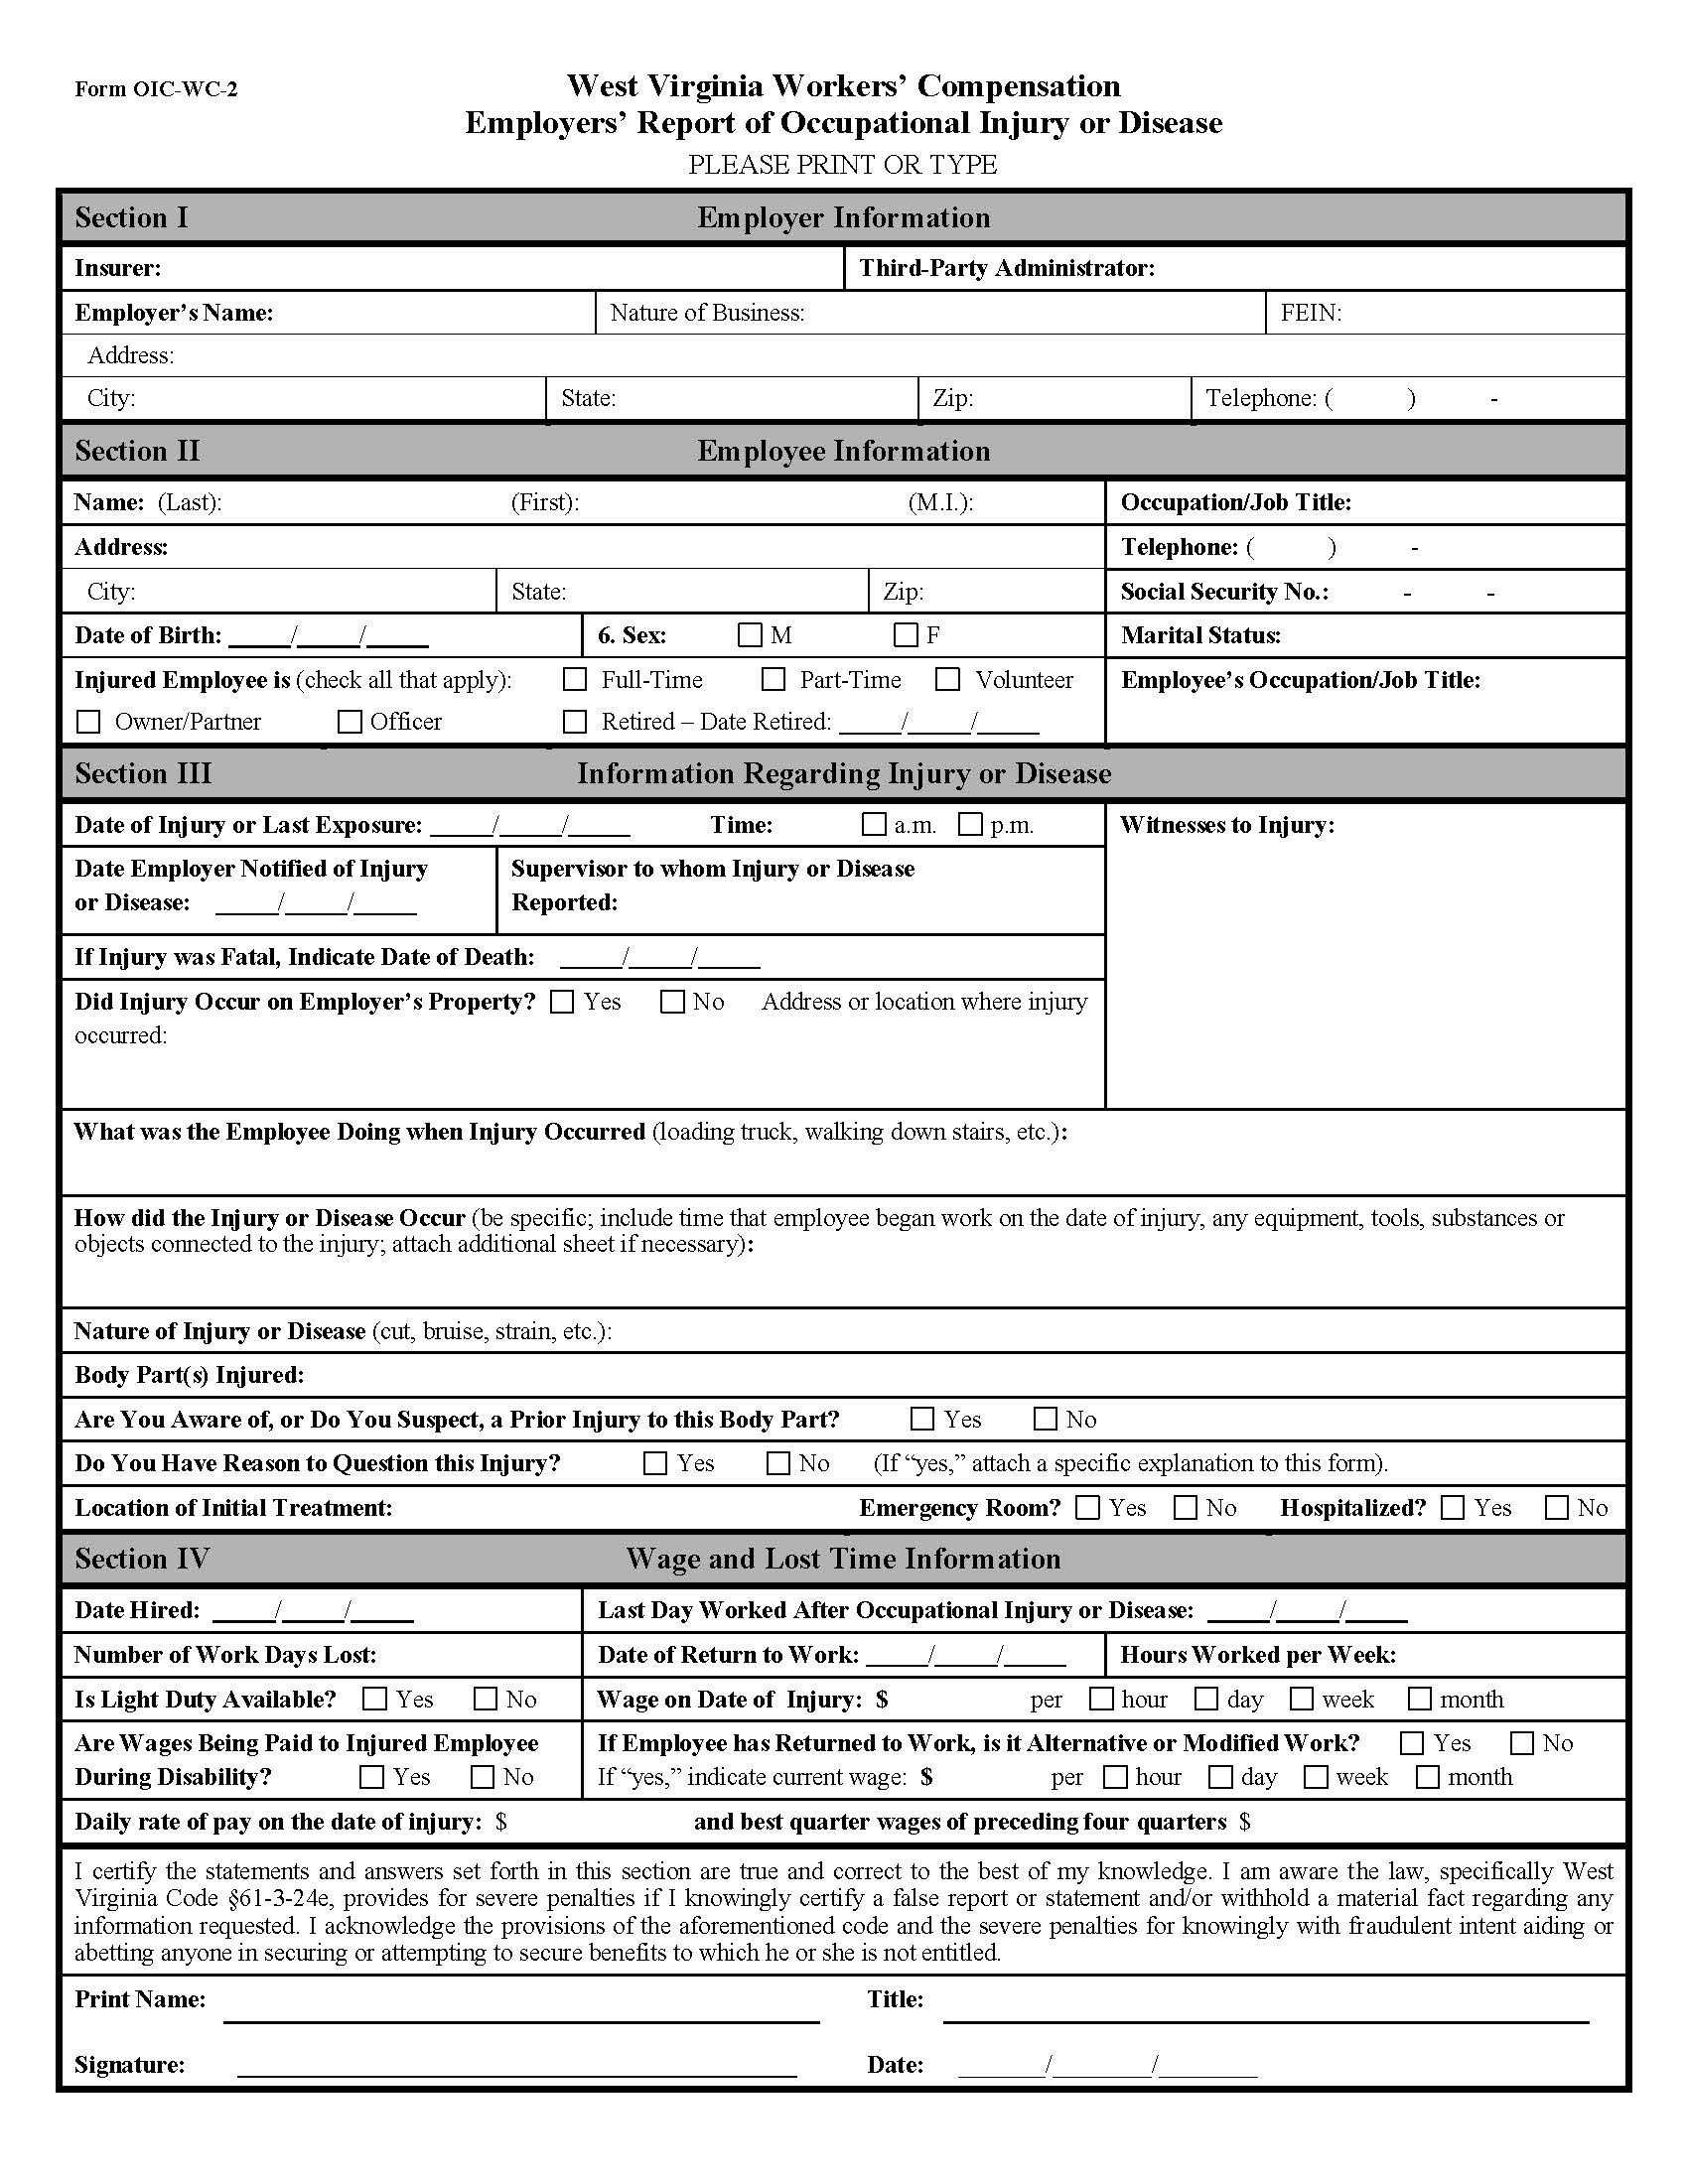 Image of the OIC-WC-2, one of the WV workers’ compensation forms required by West Virginia workers’ compensation rules.